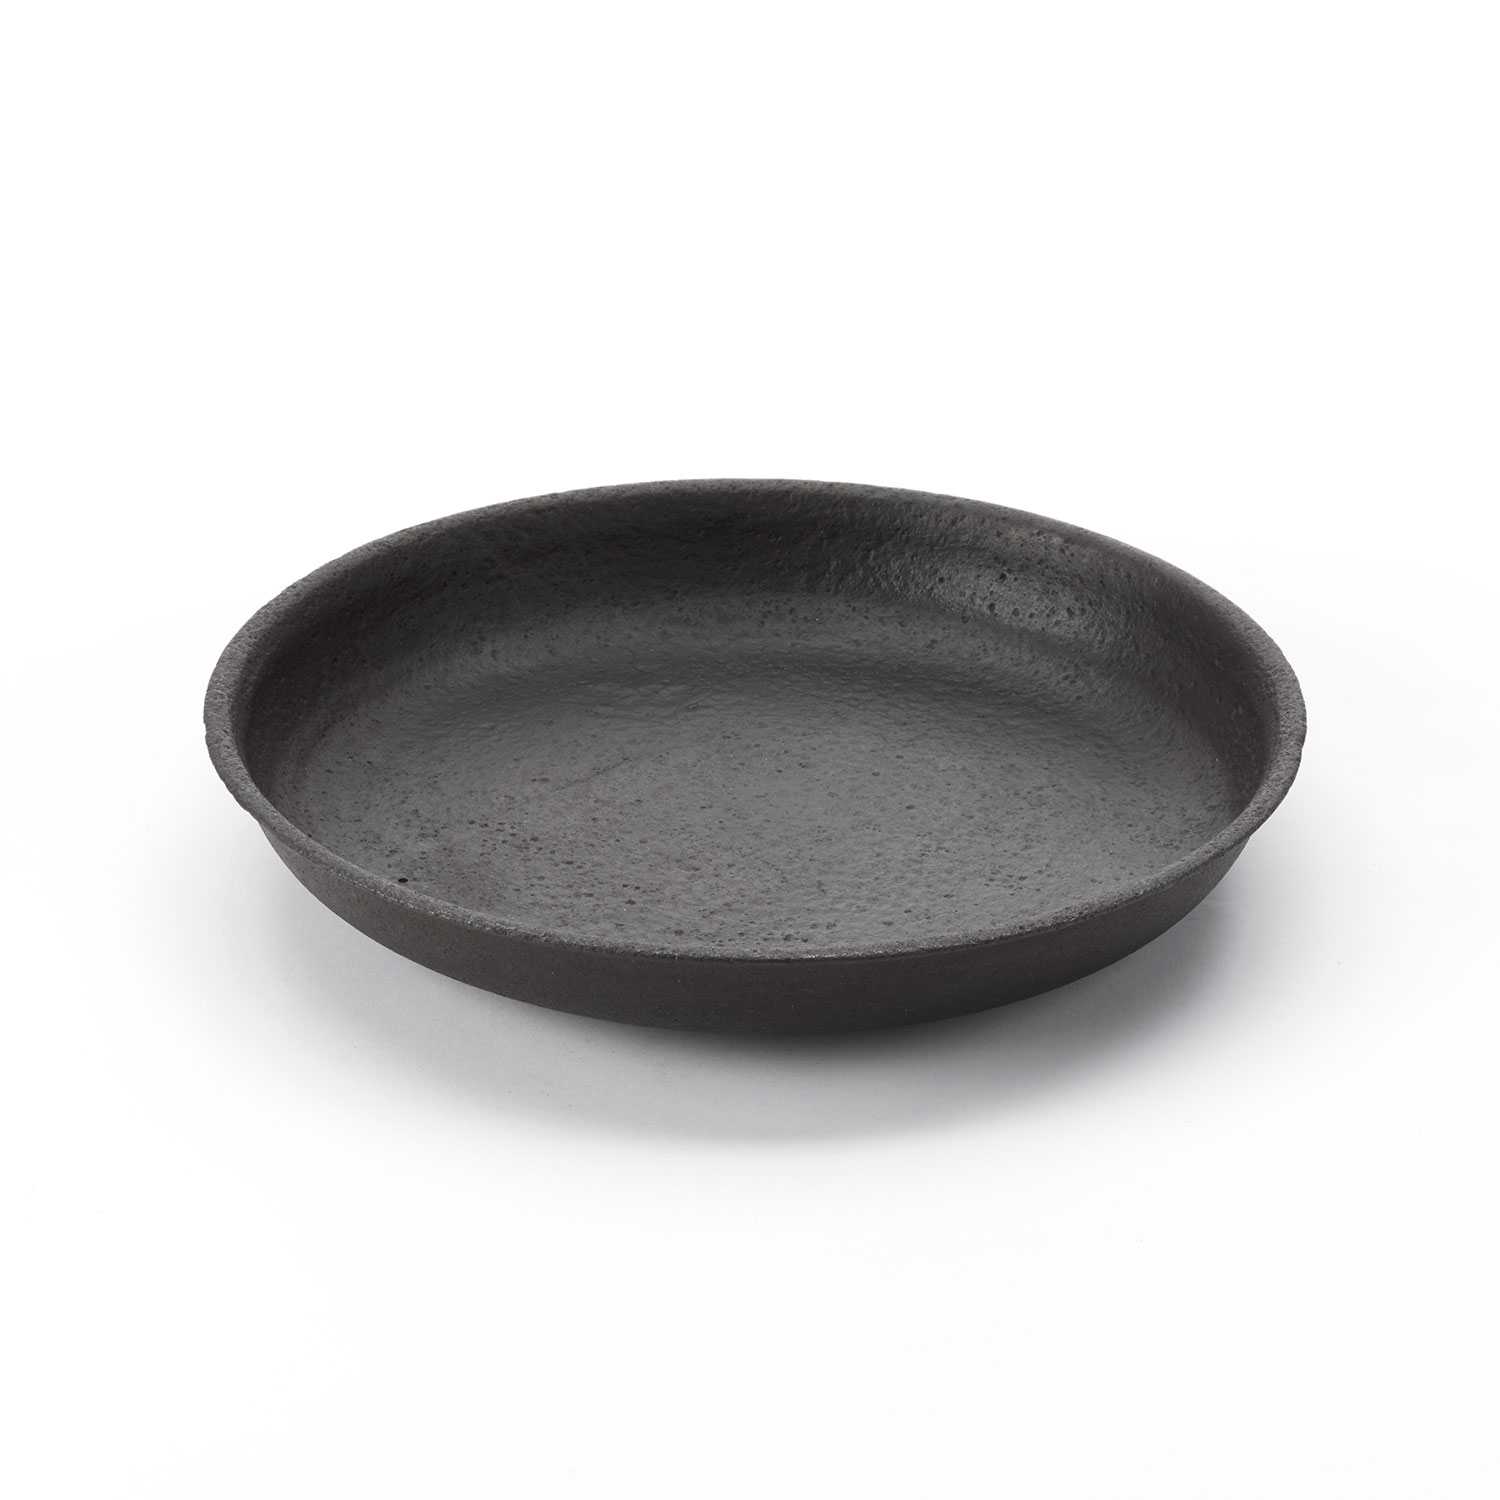 https://nohosurfaceandprop.com/wp-content/uploads/2019/09/Cast_Iron_No4A_Footed_Bowl_10Dx2H_149.jpg